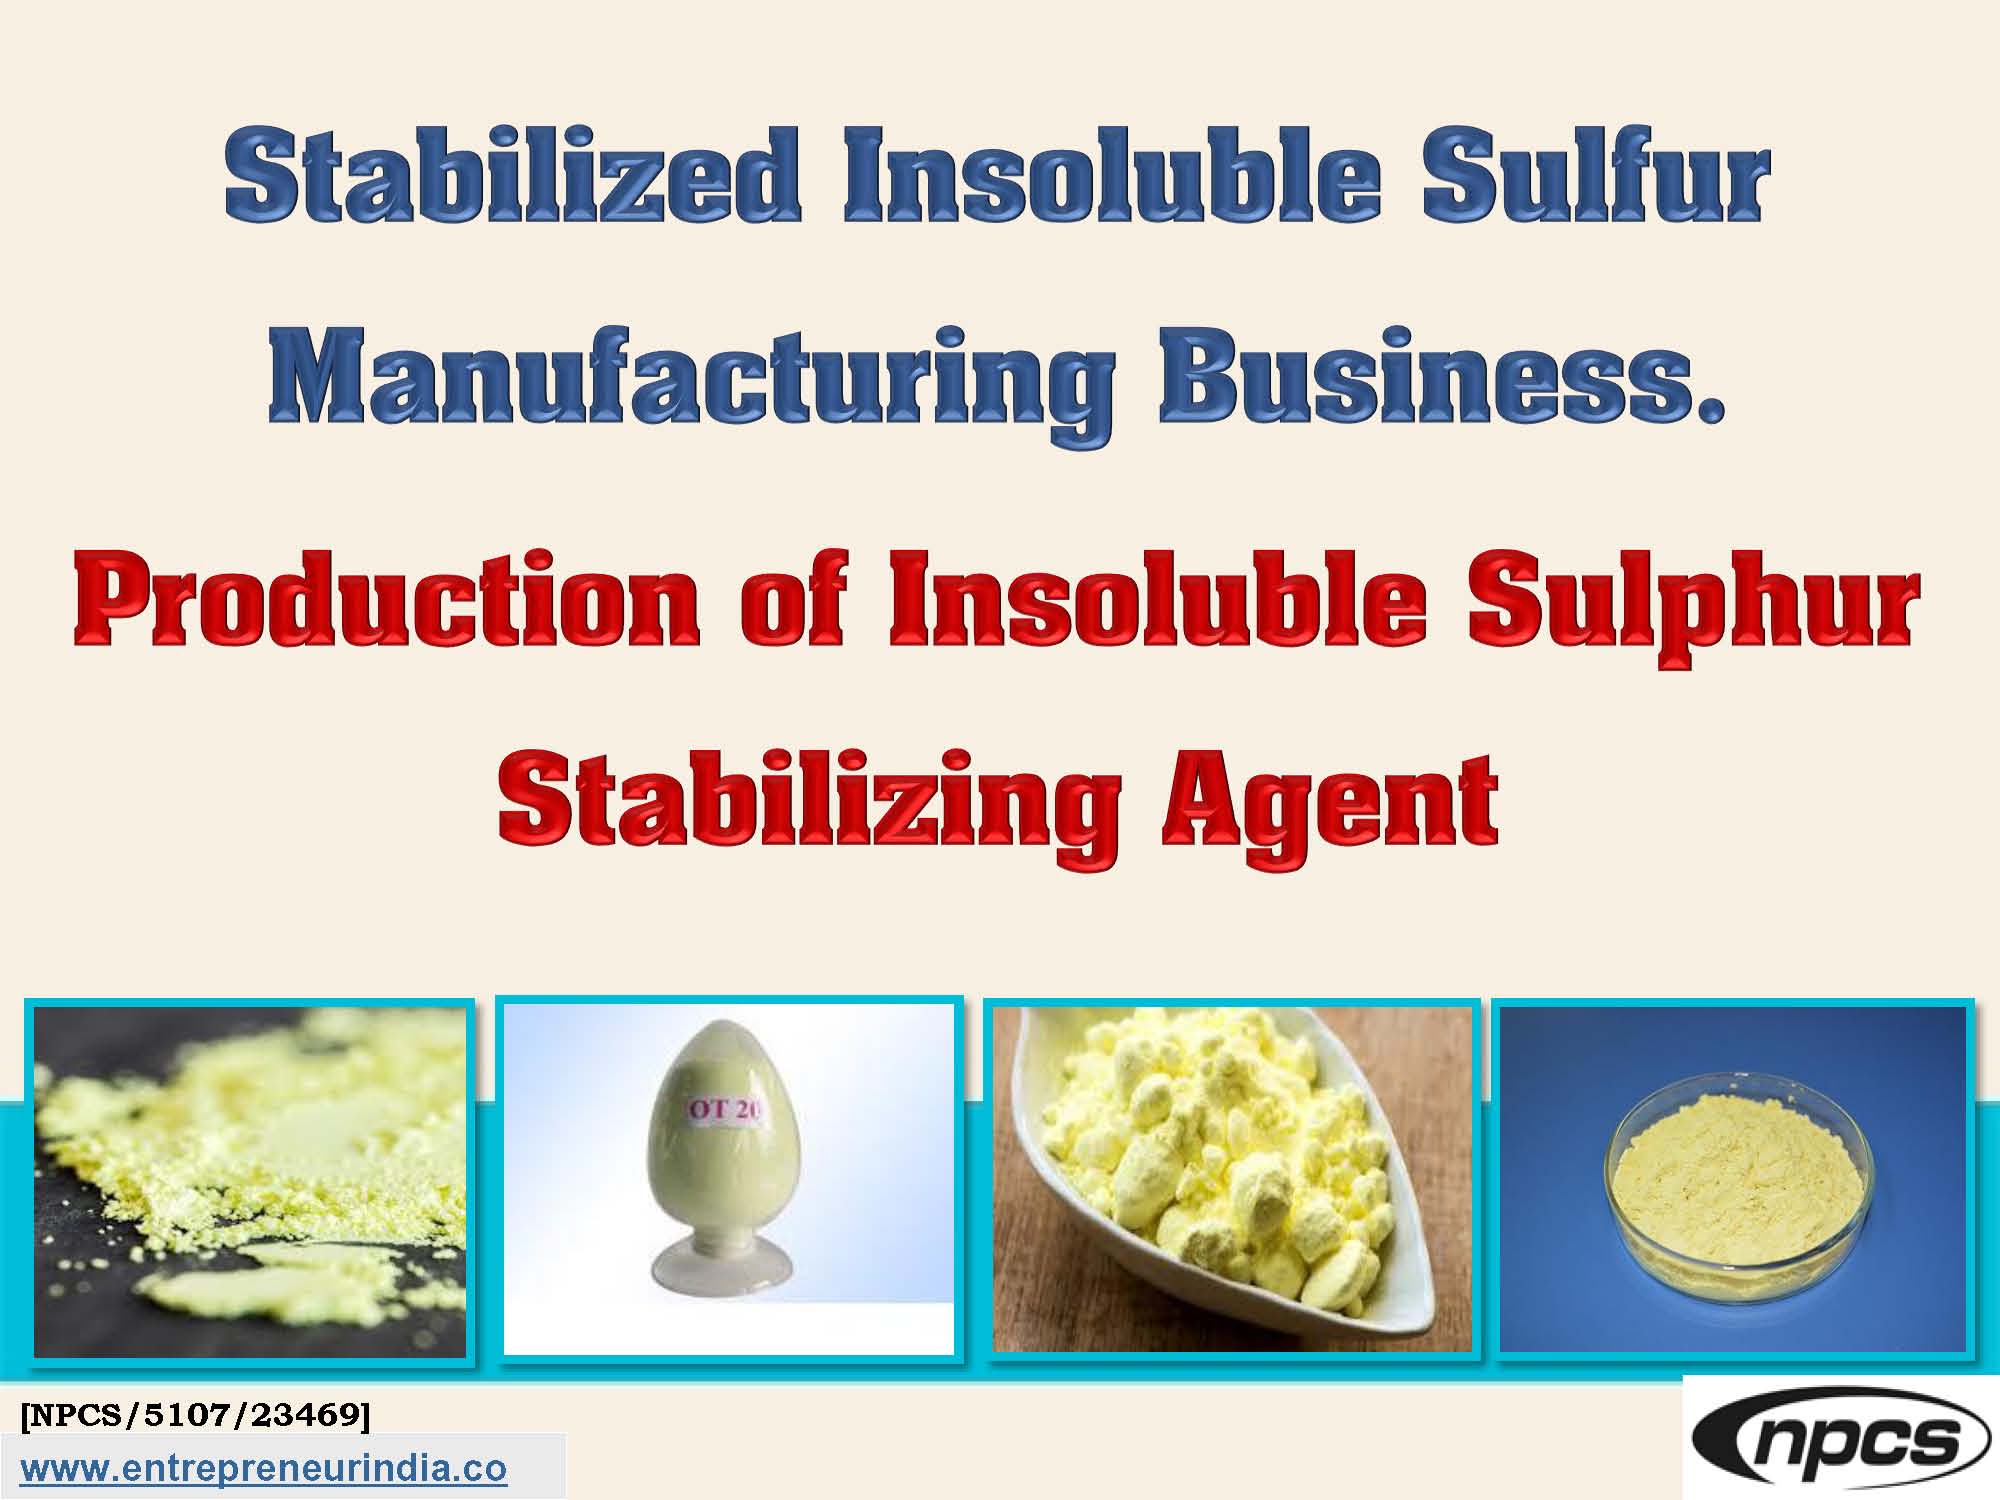 Stabilized Insoluble Sulfur Manufacturing Business